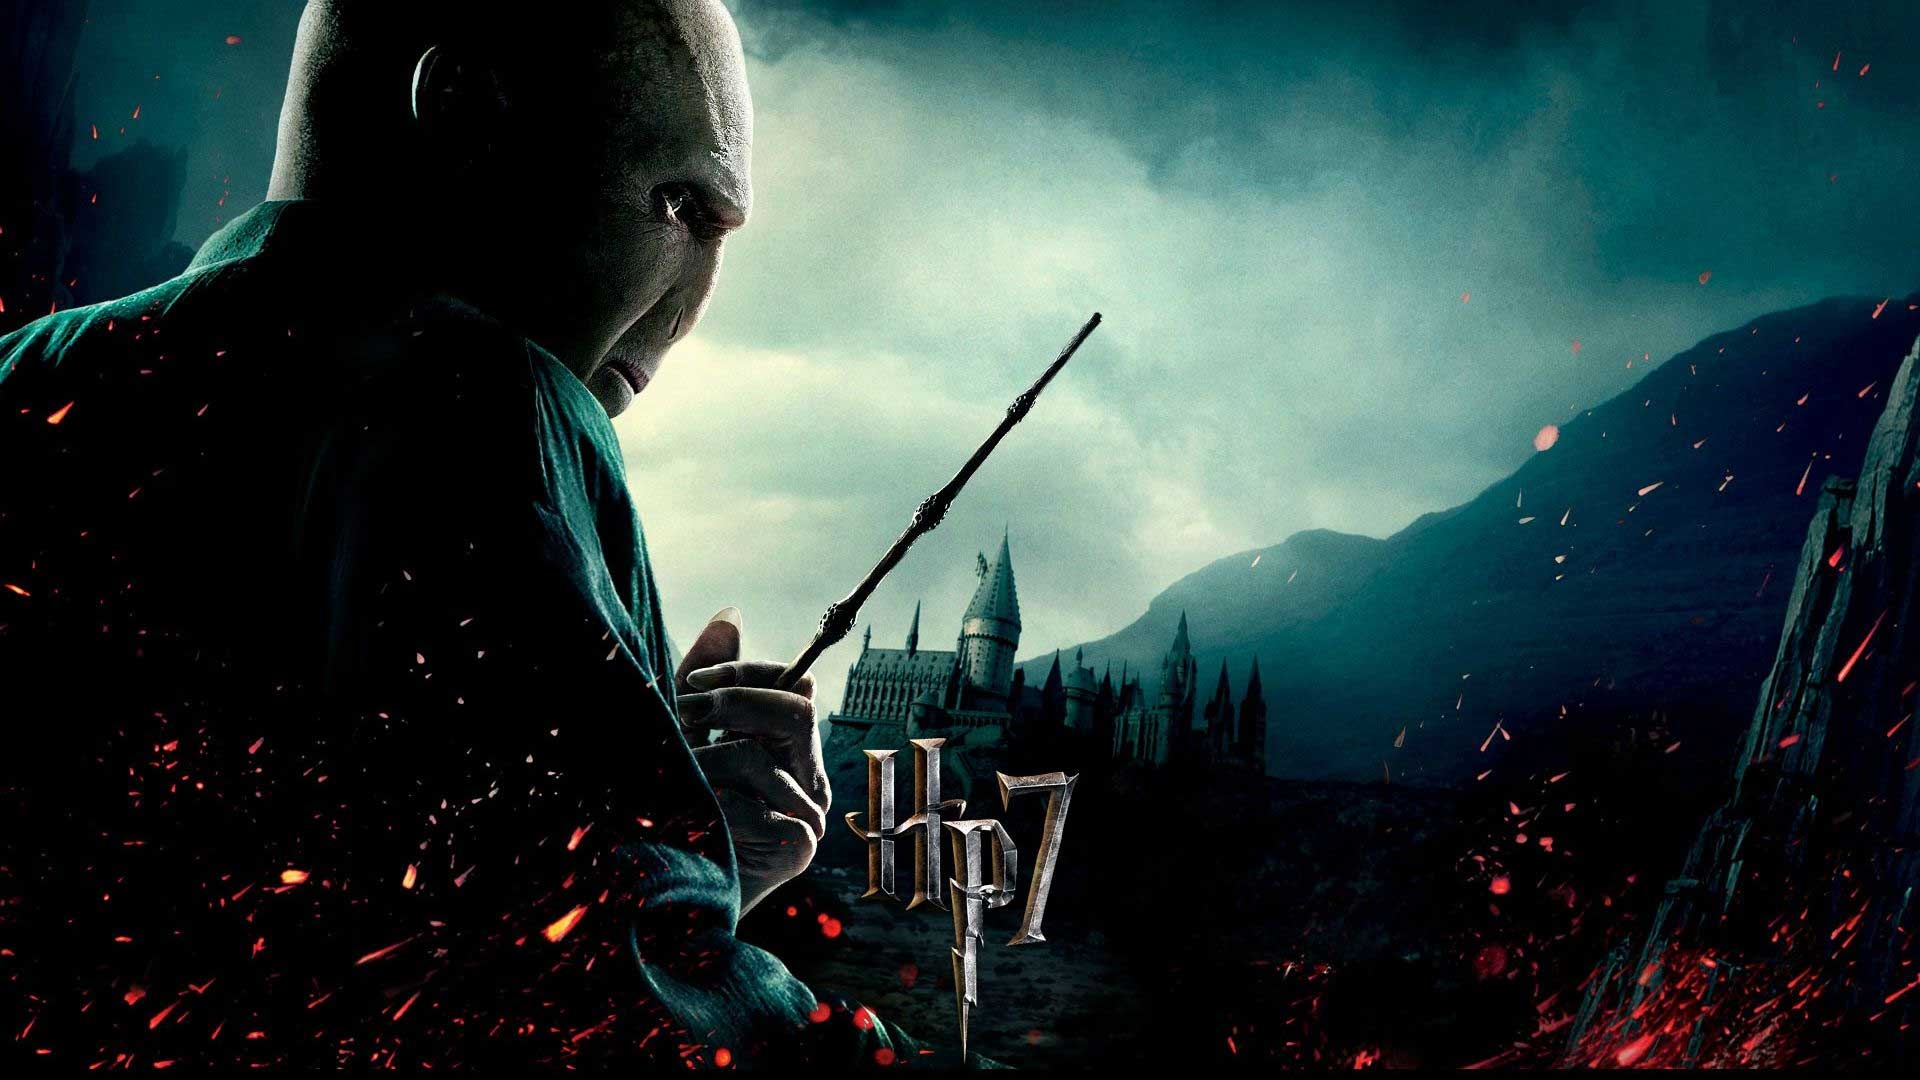 harry potter and the deathly hallows part 1 game